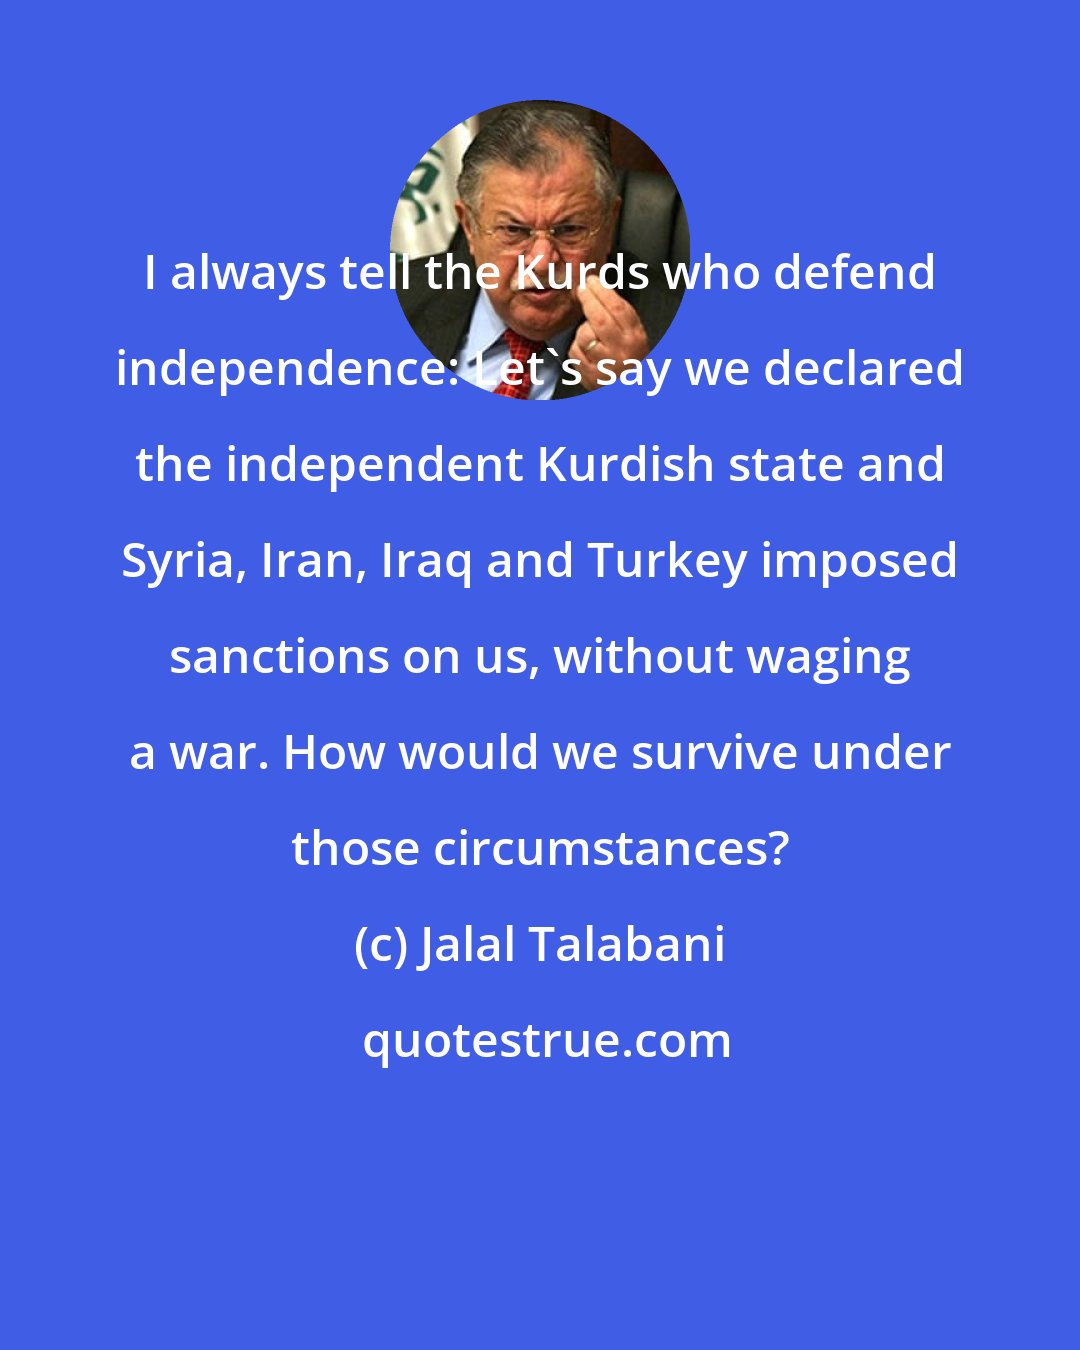 Jalal Talabani: I always tell the Kurds who defend independence: Let's say we declared the independent Kurdish state and Syria, Iran, Iraq and Turkey imposed sanctions on us, without waging a war. How would we survive under those circumstances?